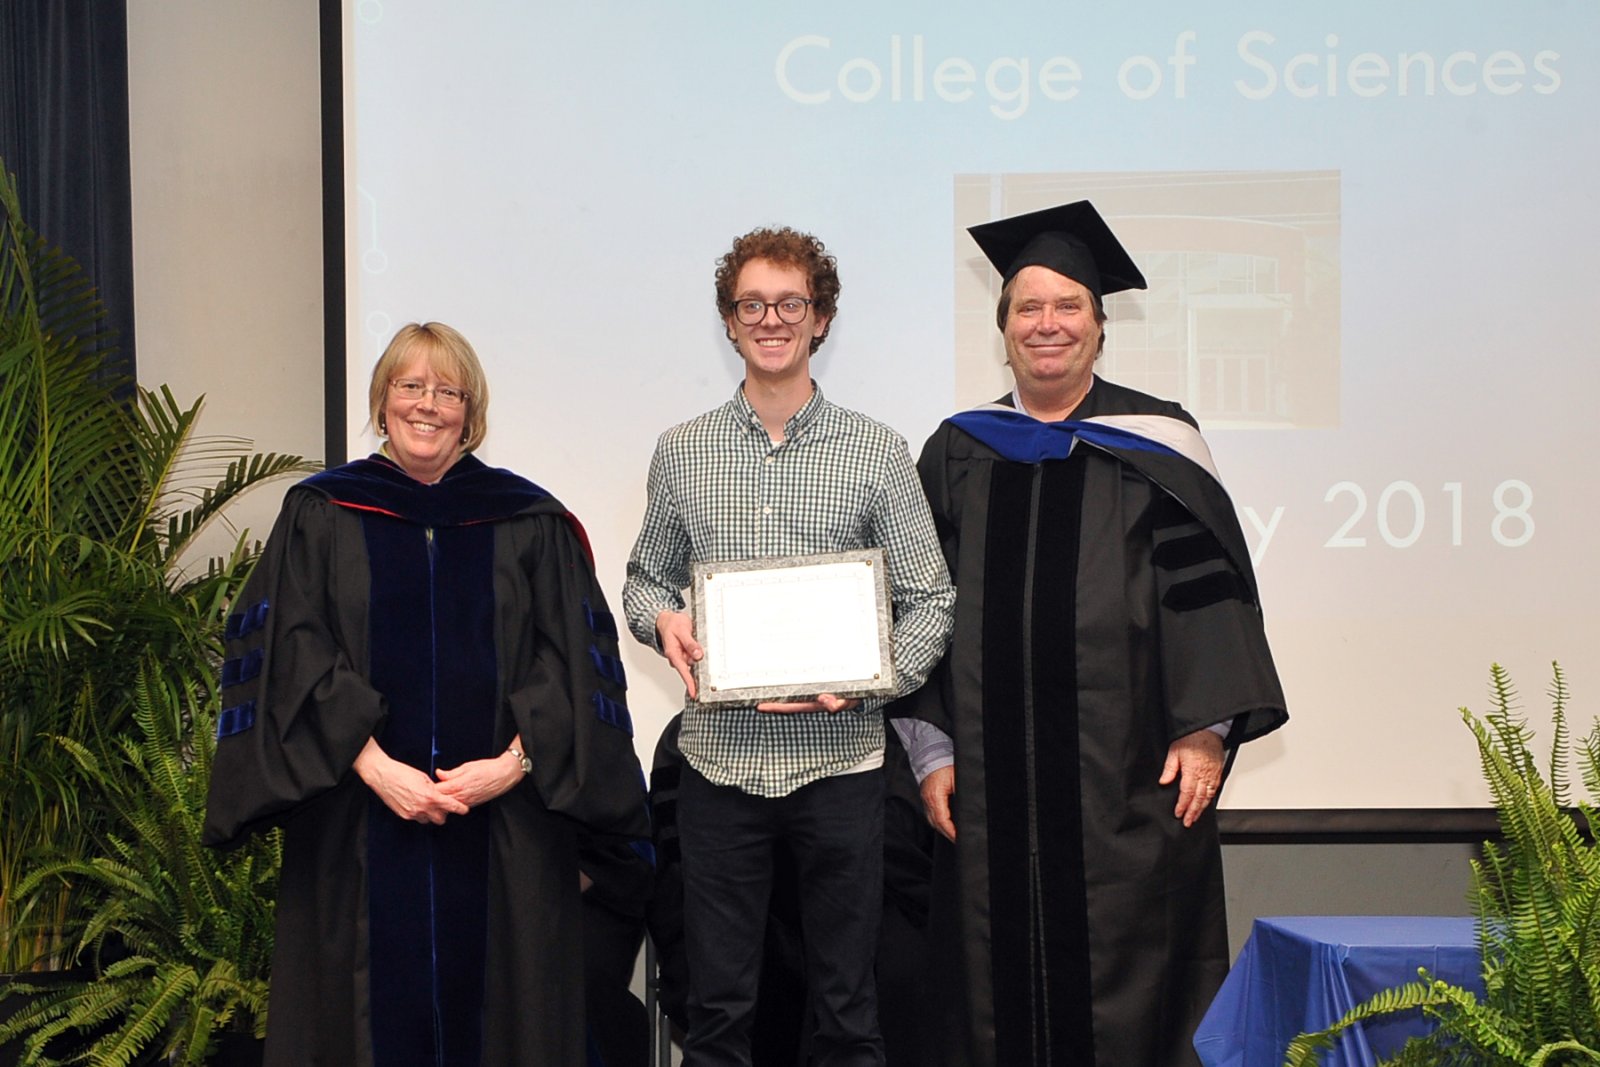 Mitchell Kerver received the Physics Department Outstanding 